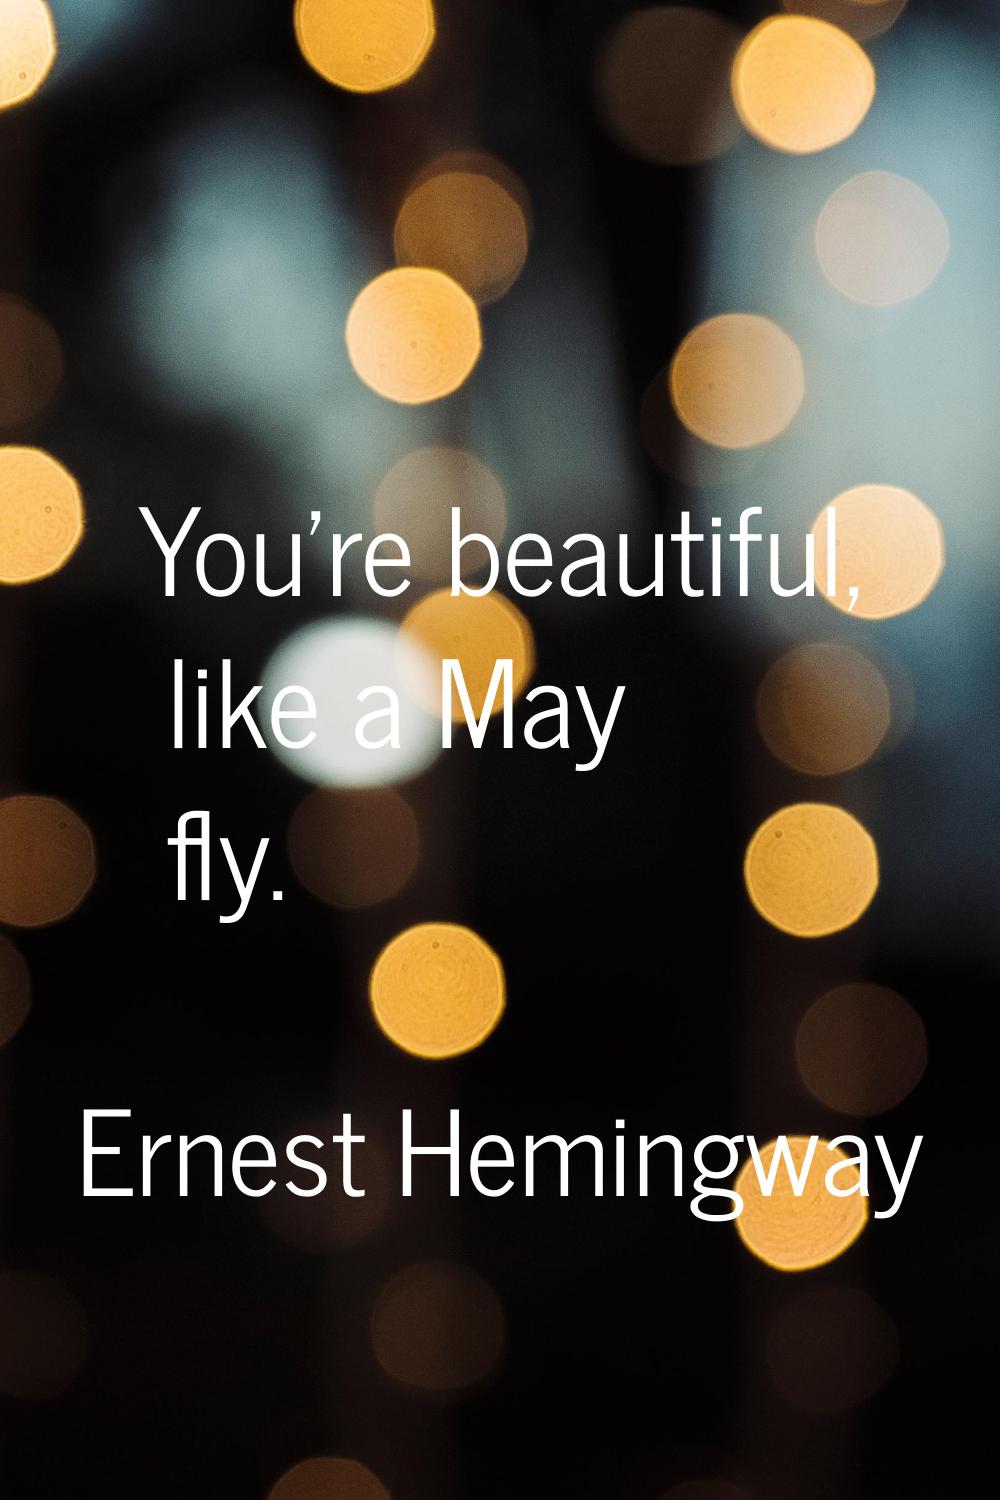 You're beautiful, like a May fly.